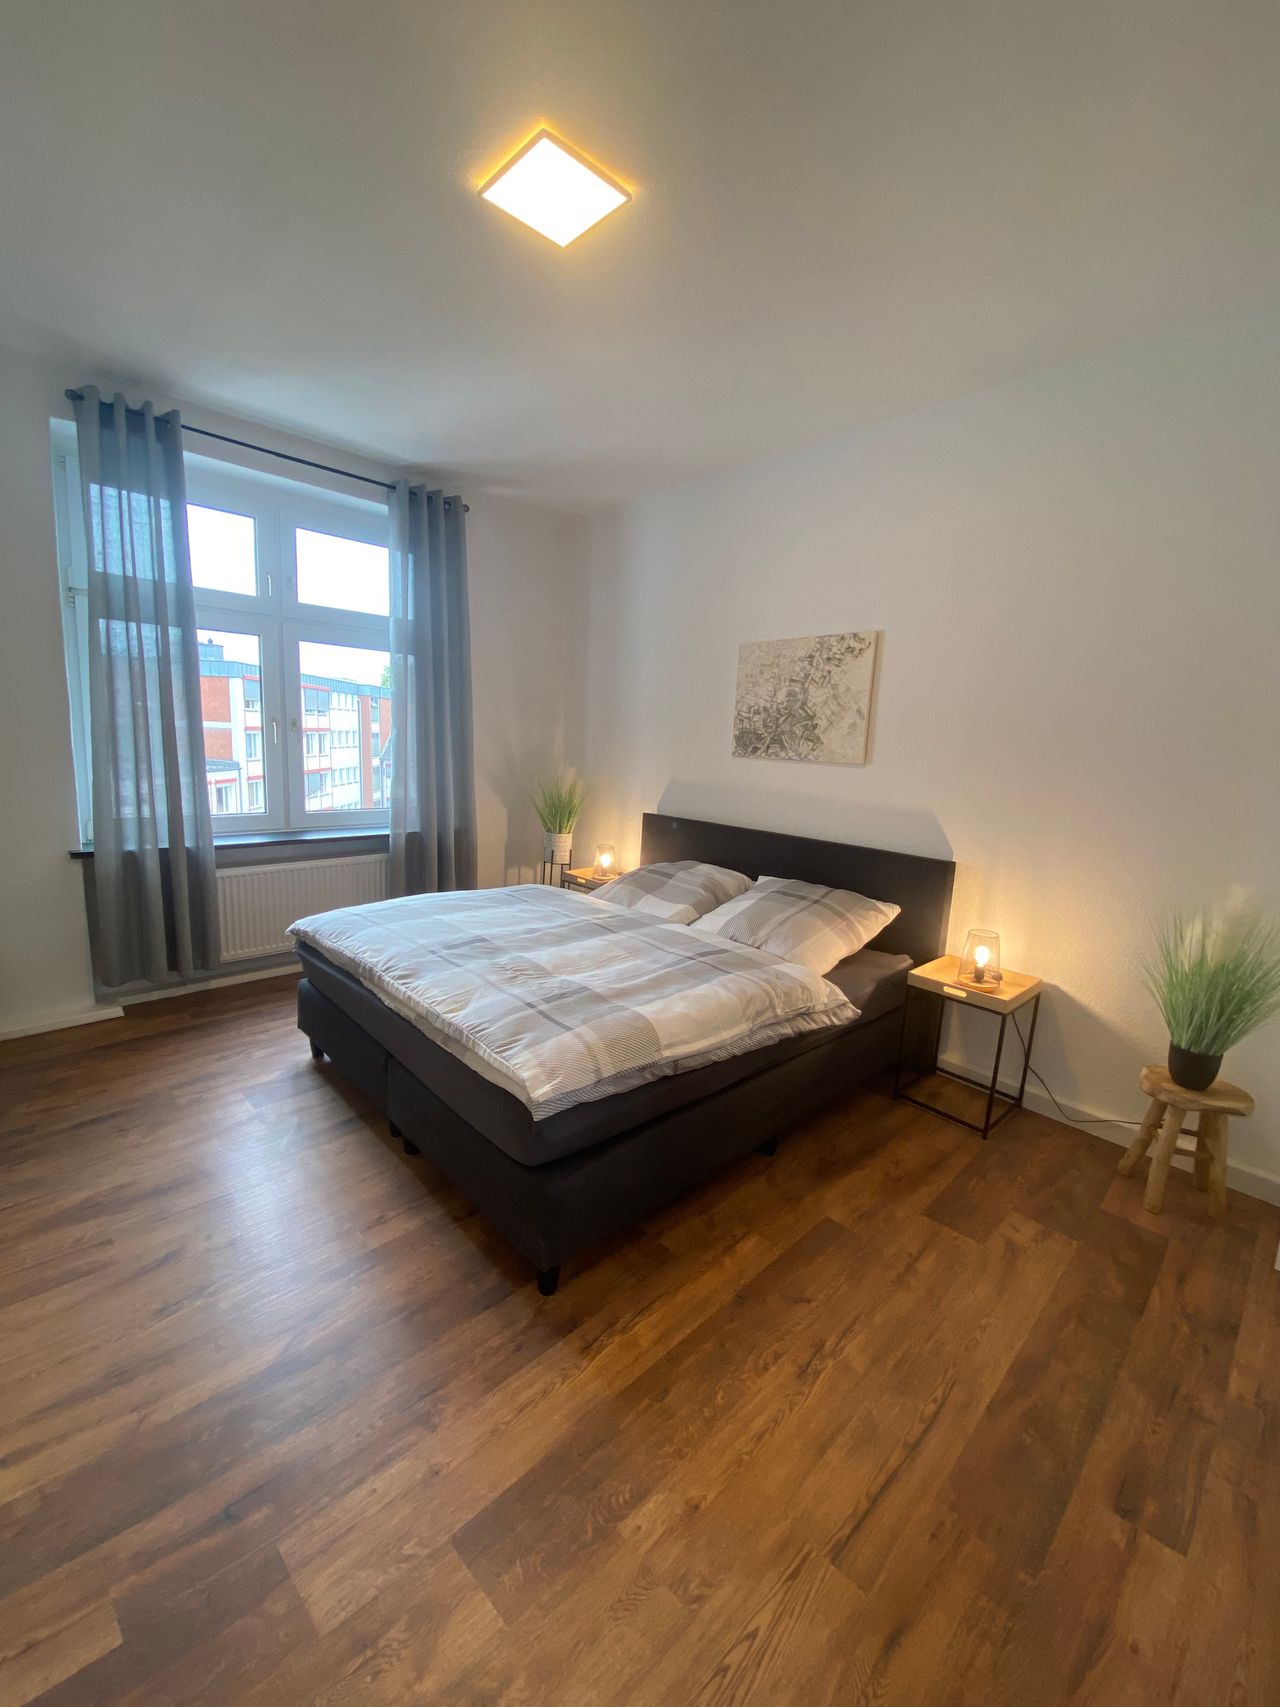 New & bright apartment in direct city center Dortmund